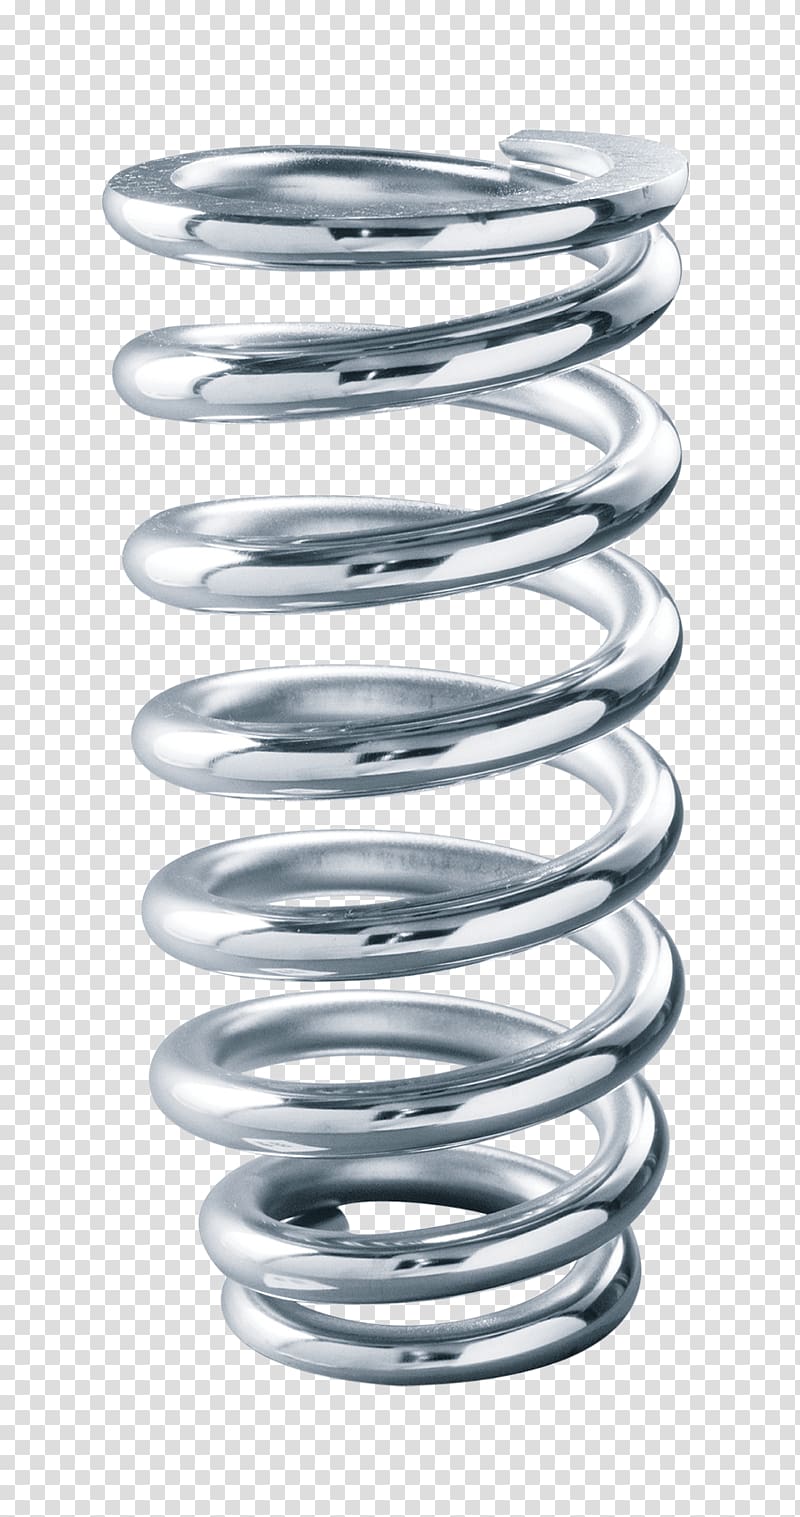 gray steel coil spring, Car Coil spring Powder coating Coilover, spring transparent background PNG clipart